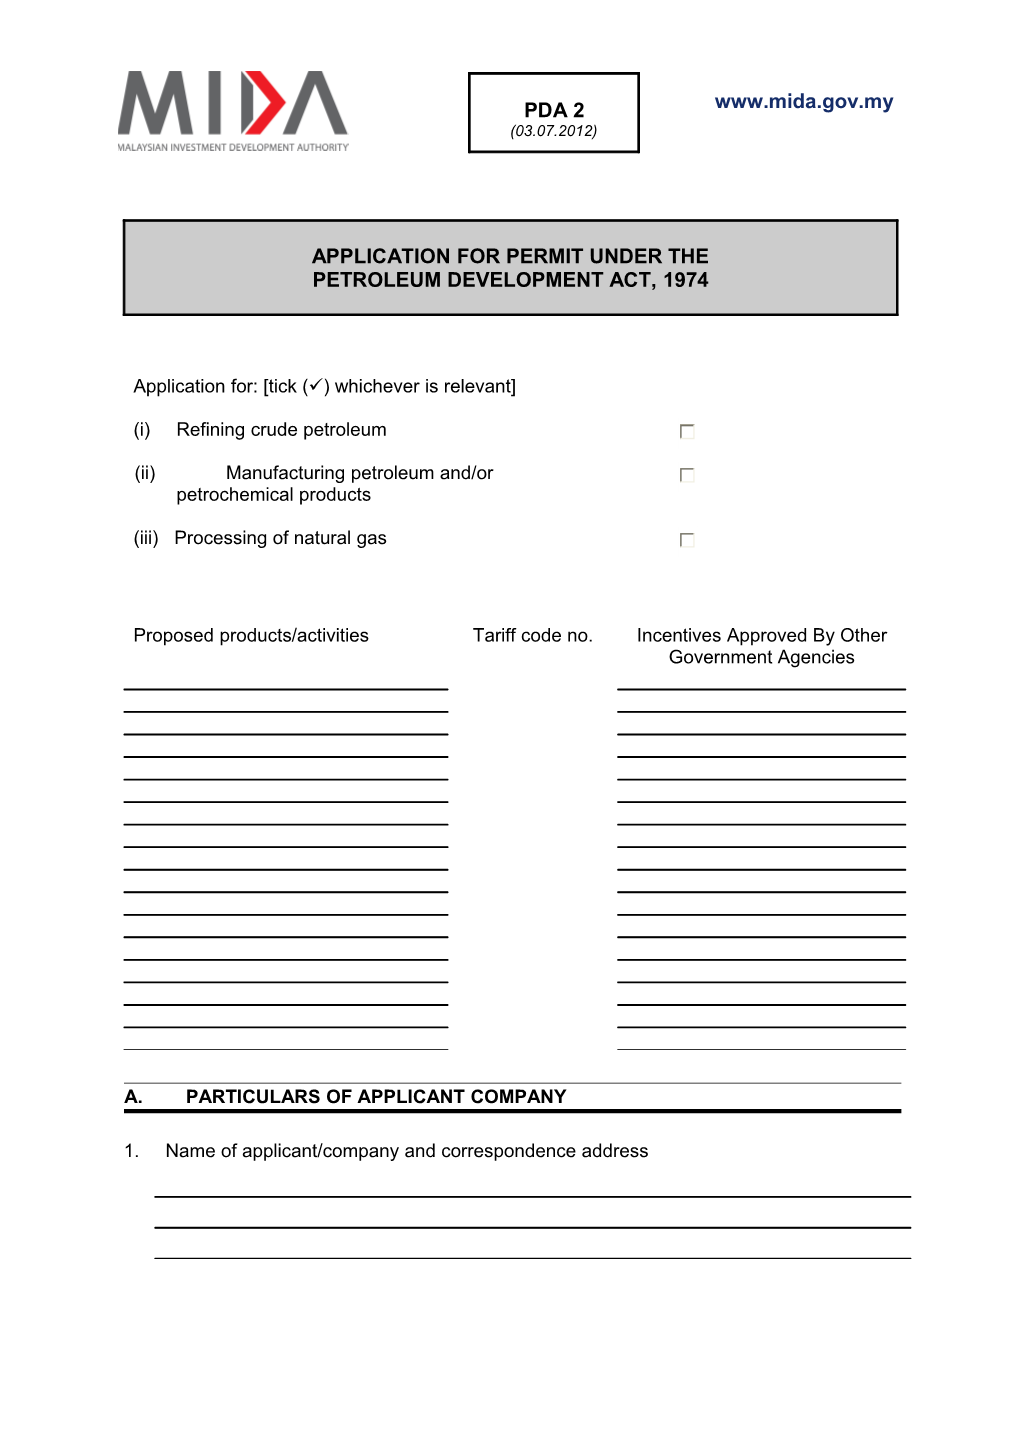 Application for Incentives